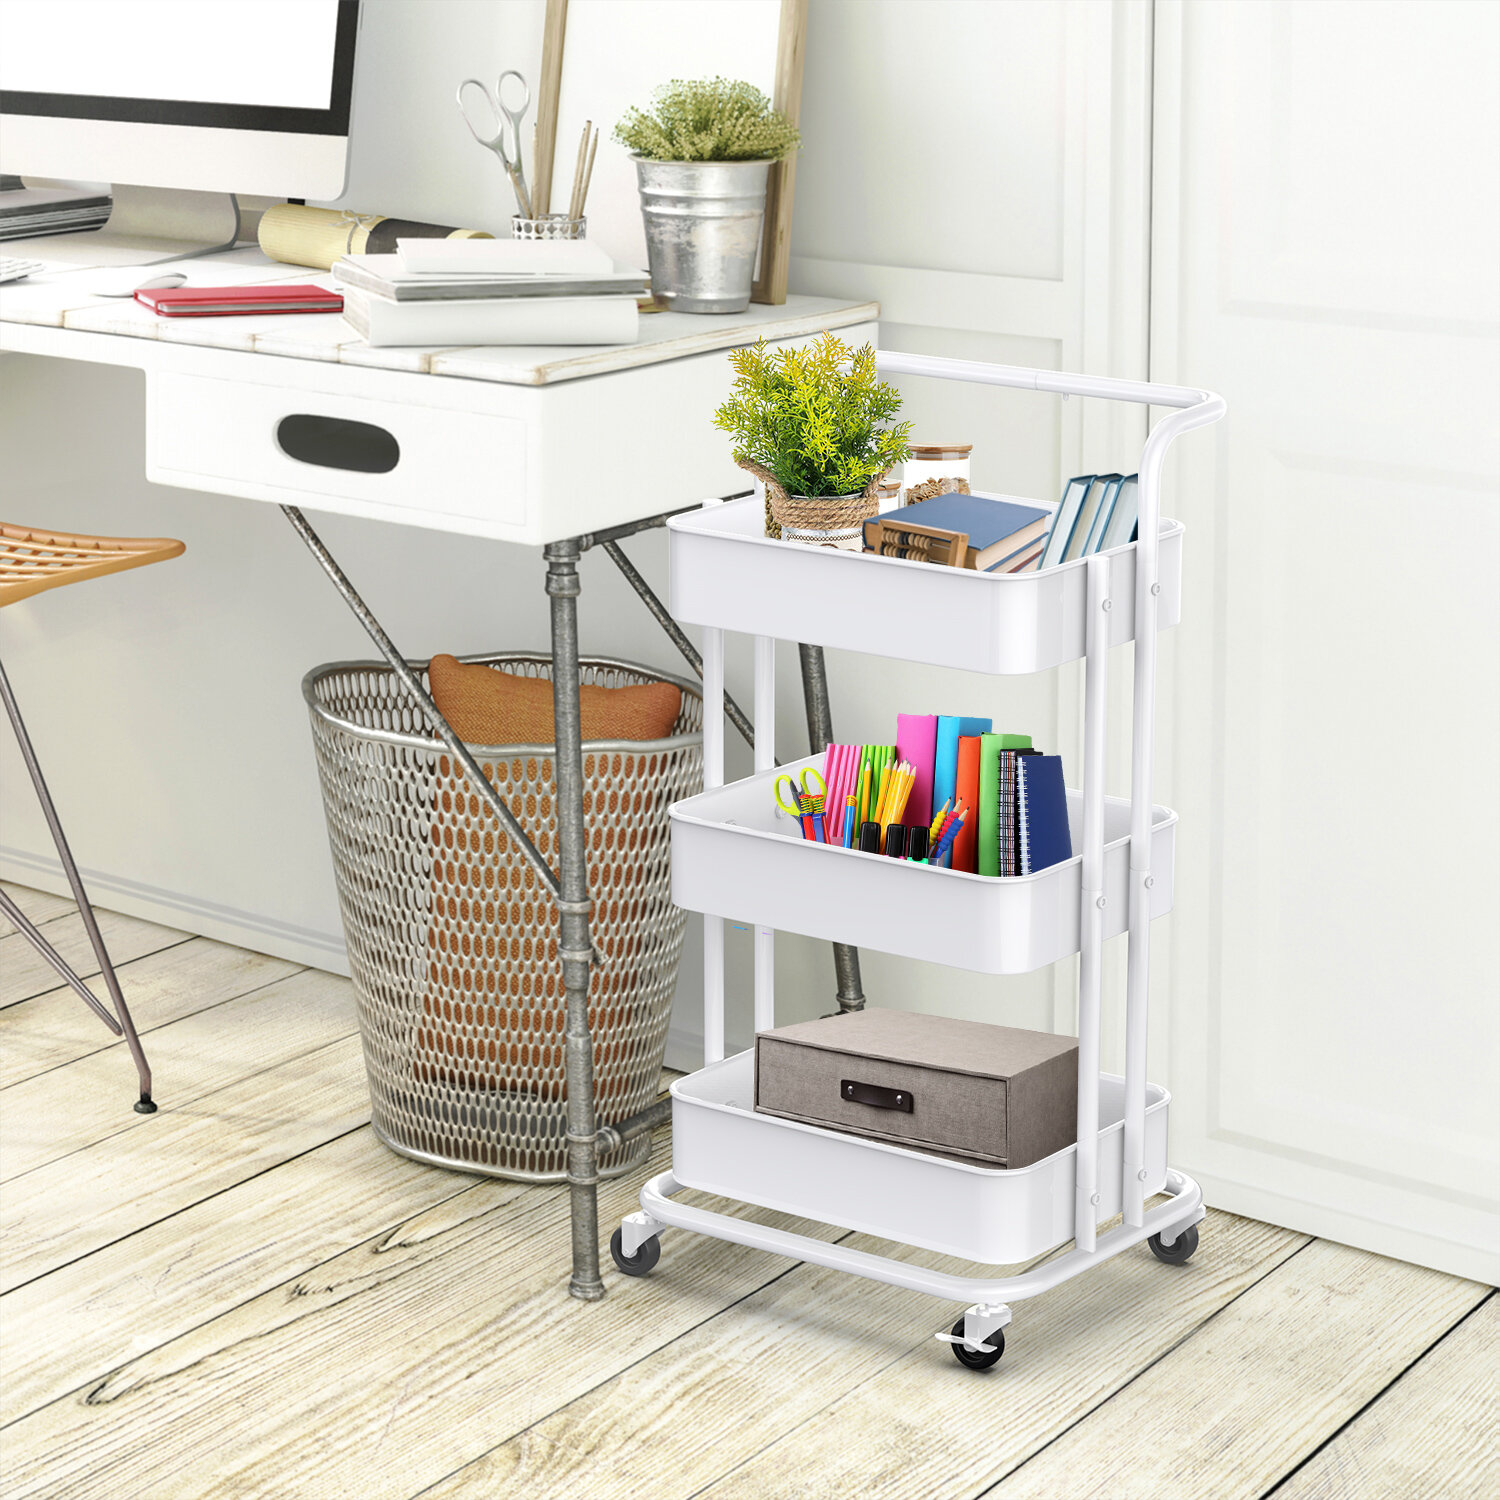 3-Tier Utility Rolling Cart with Large Storage and Metal Wheels for Office,Kitchen,Bedroom,Bathroom,Black,Pink,White 130839 